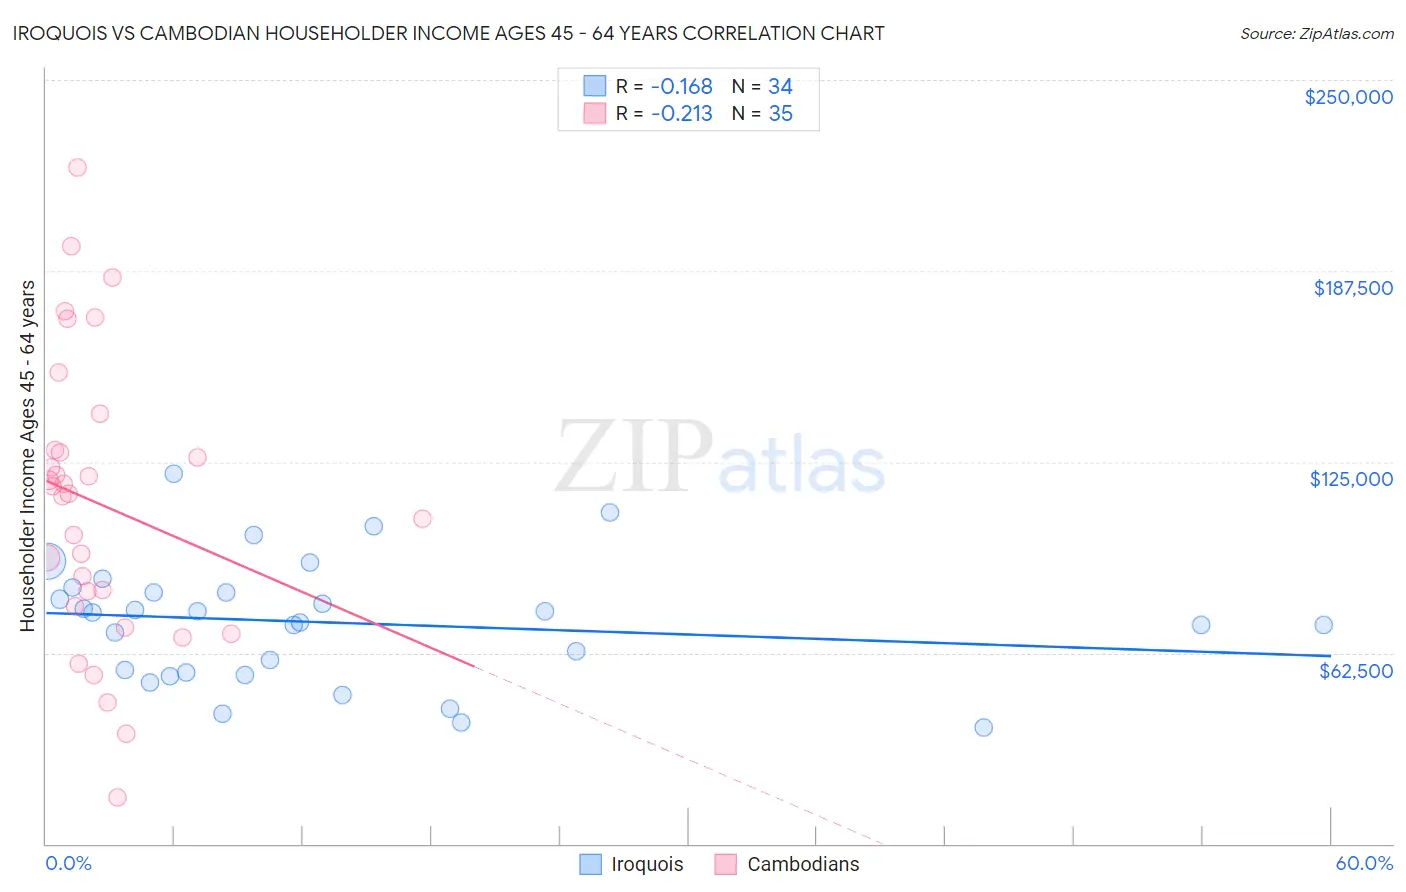 Iroquois vs Cambodian Householder Income Ages 45 - 64 years